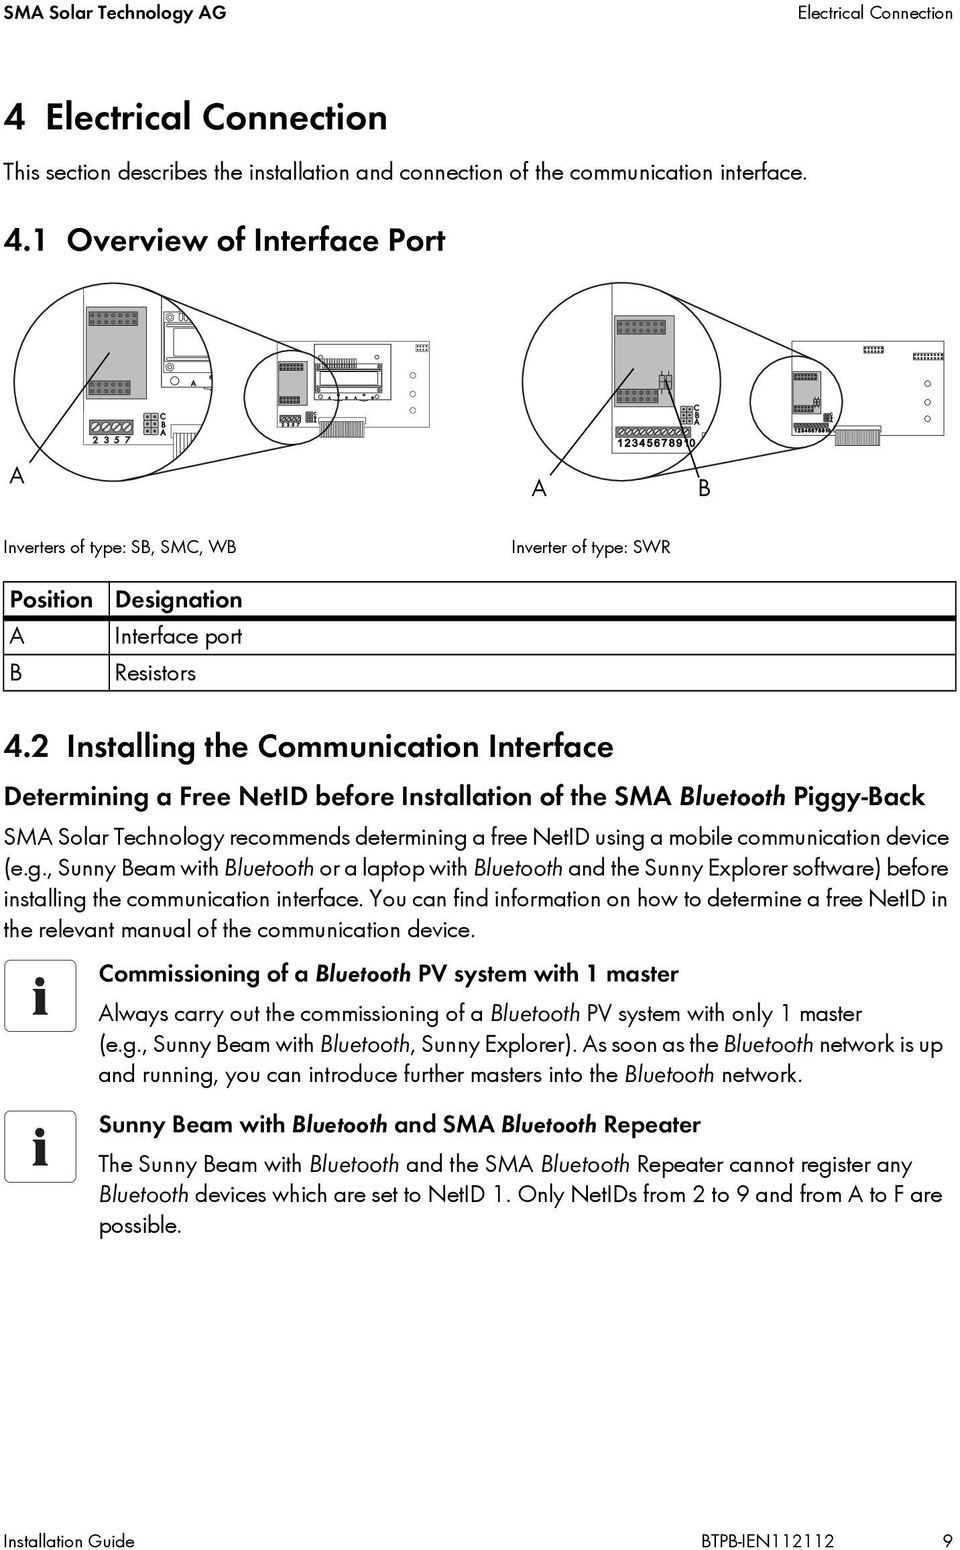 communication device (e.g., Sunny Beam with Bluetooth or a laptop with Bluetooth and the Sunny Explorer software) before installing the communication interface.